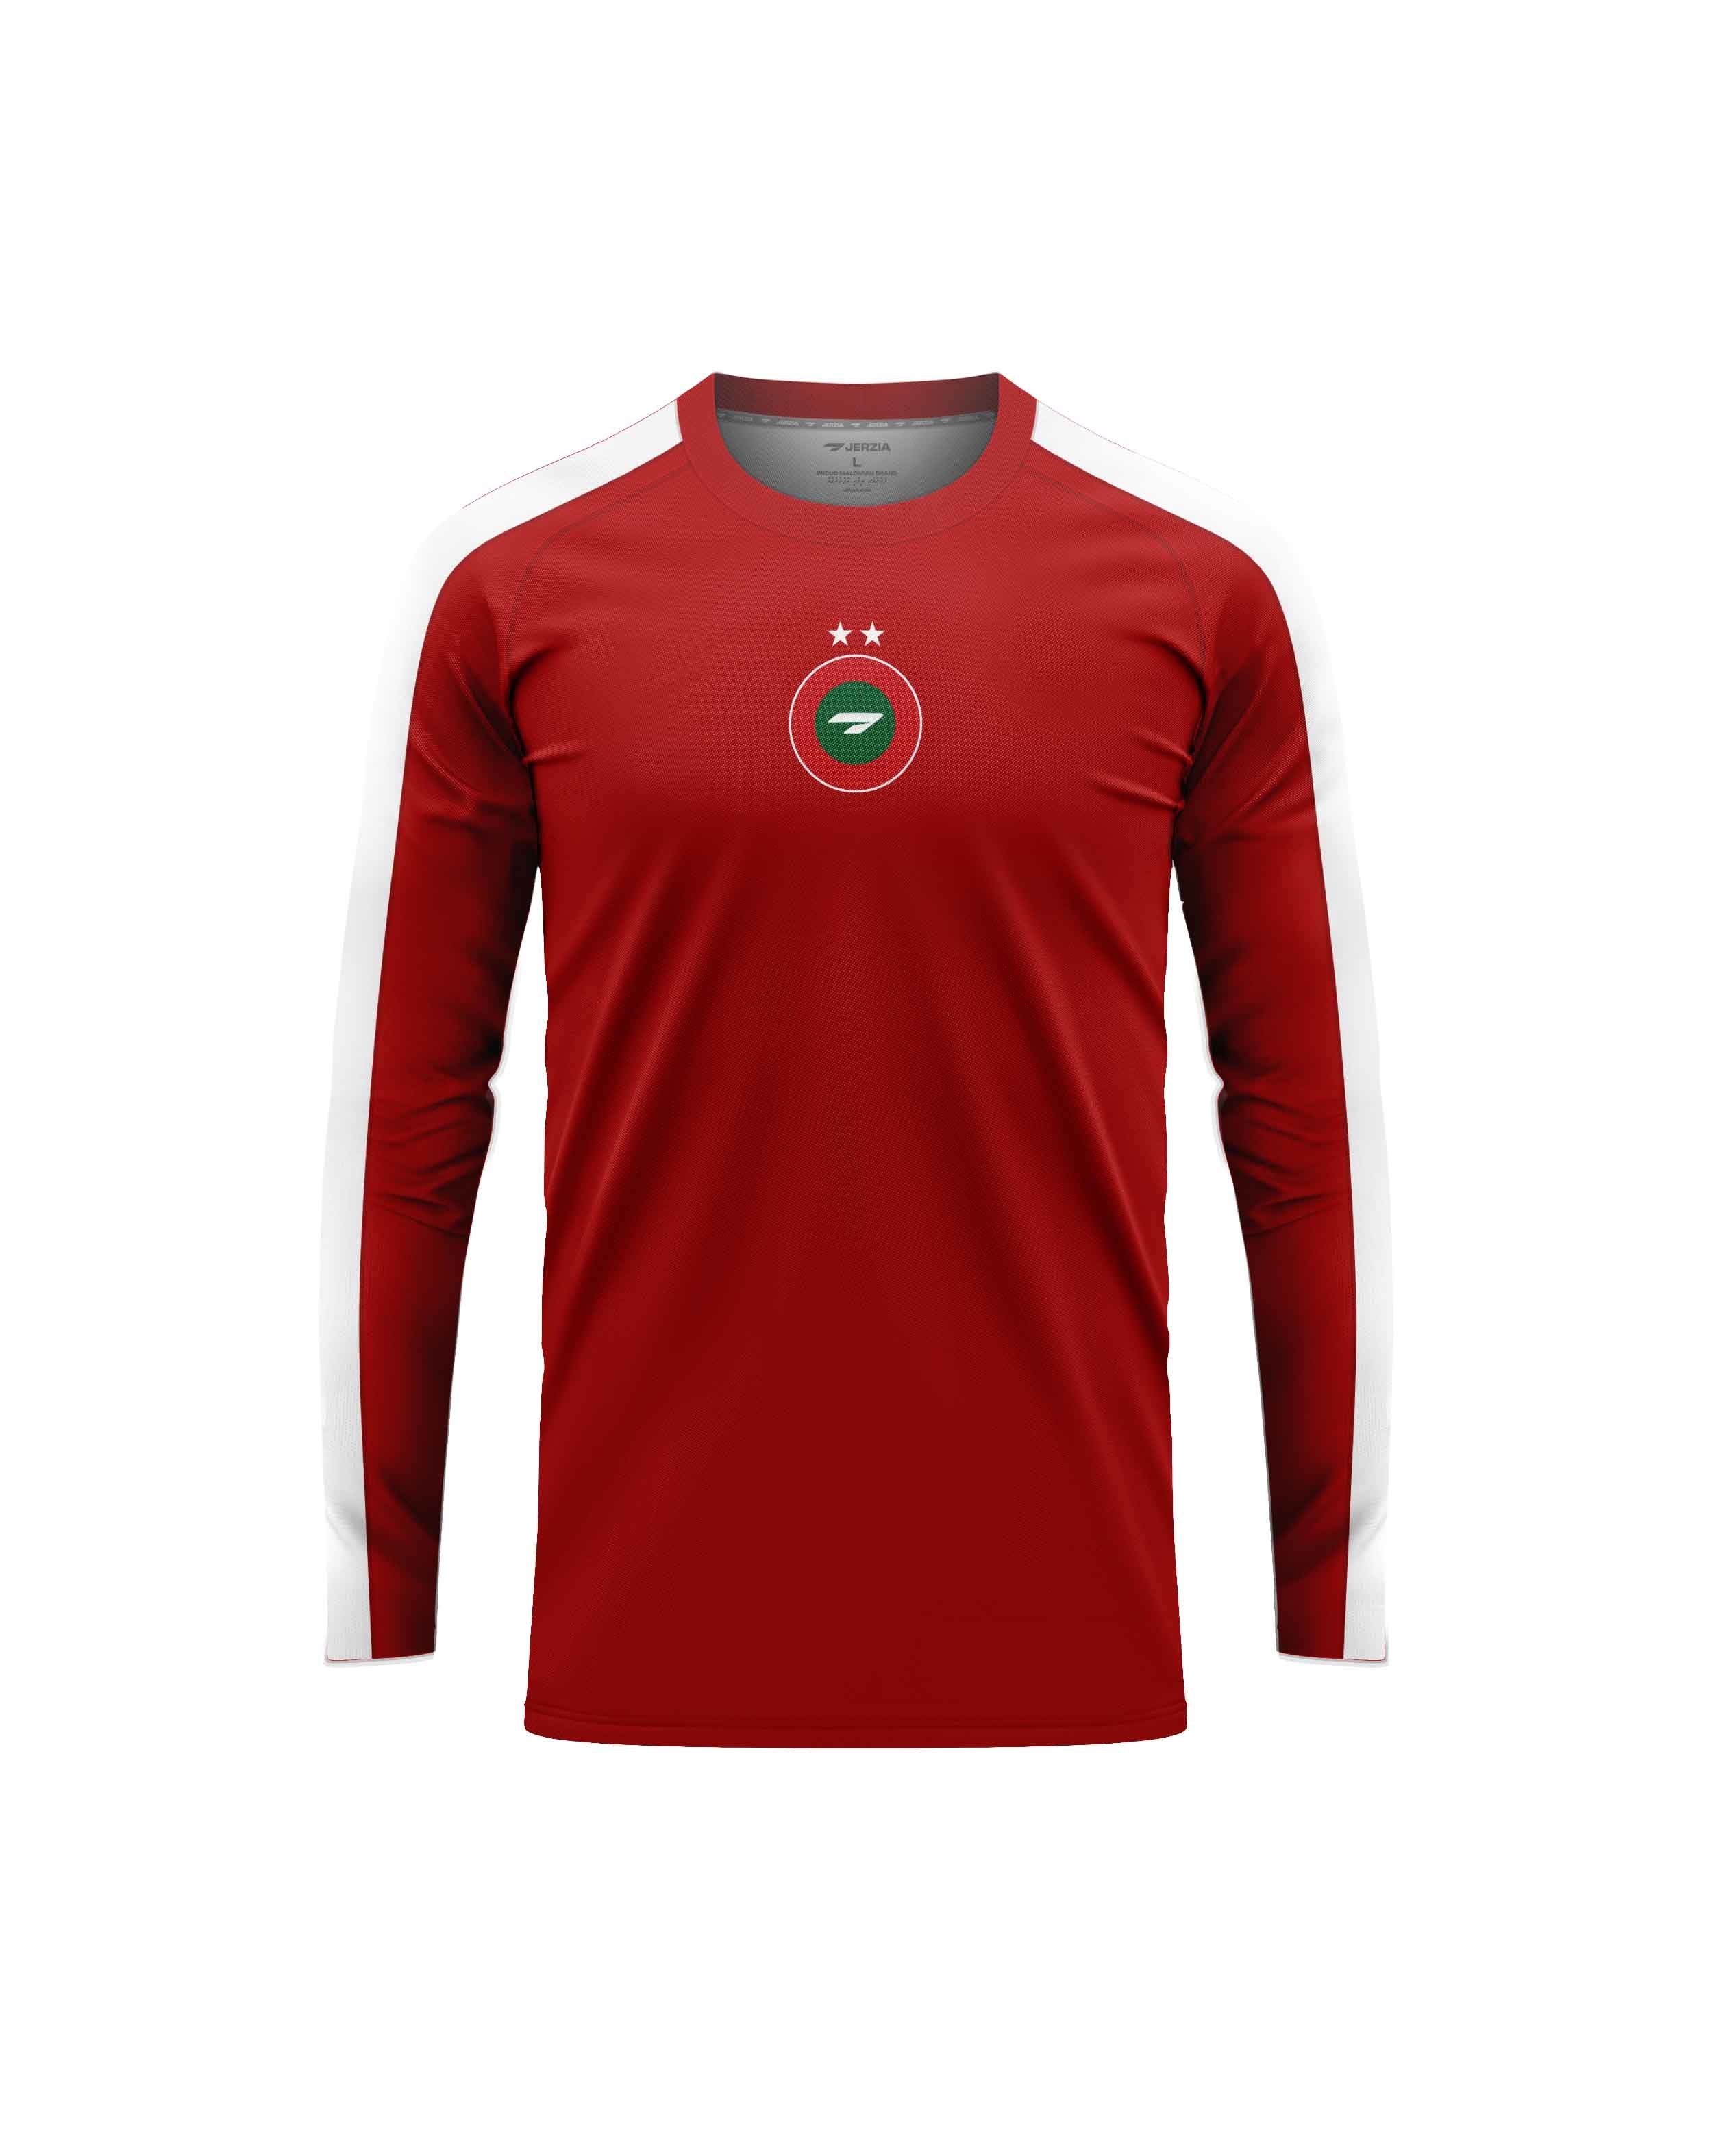 Maldives National Team Supporters Jersey LS